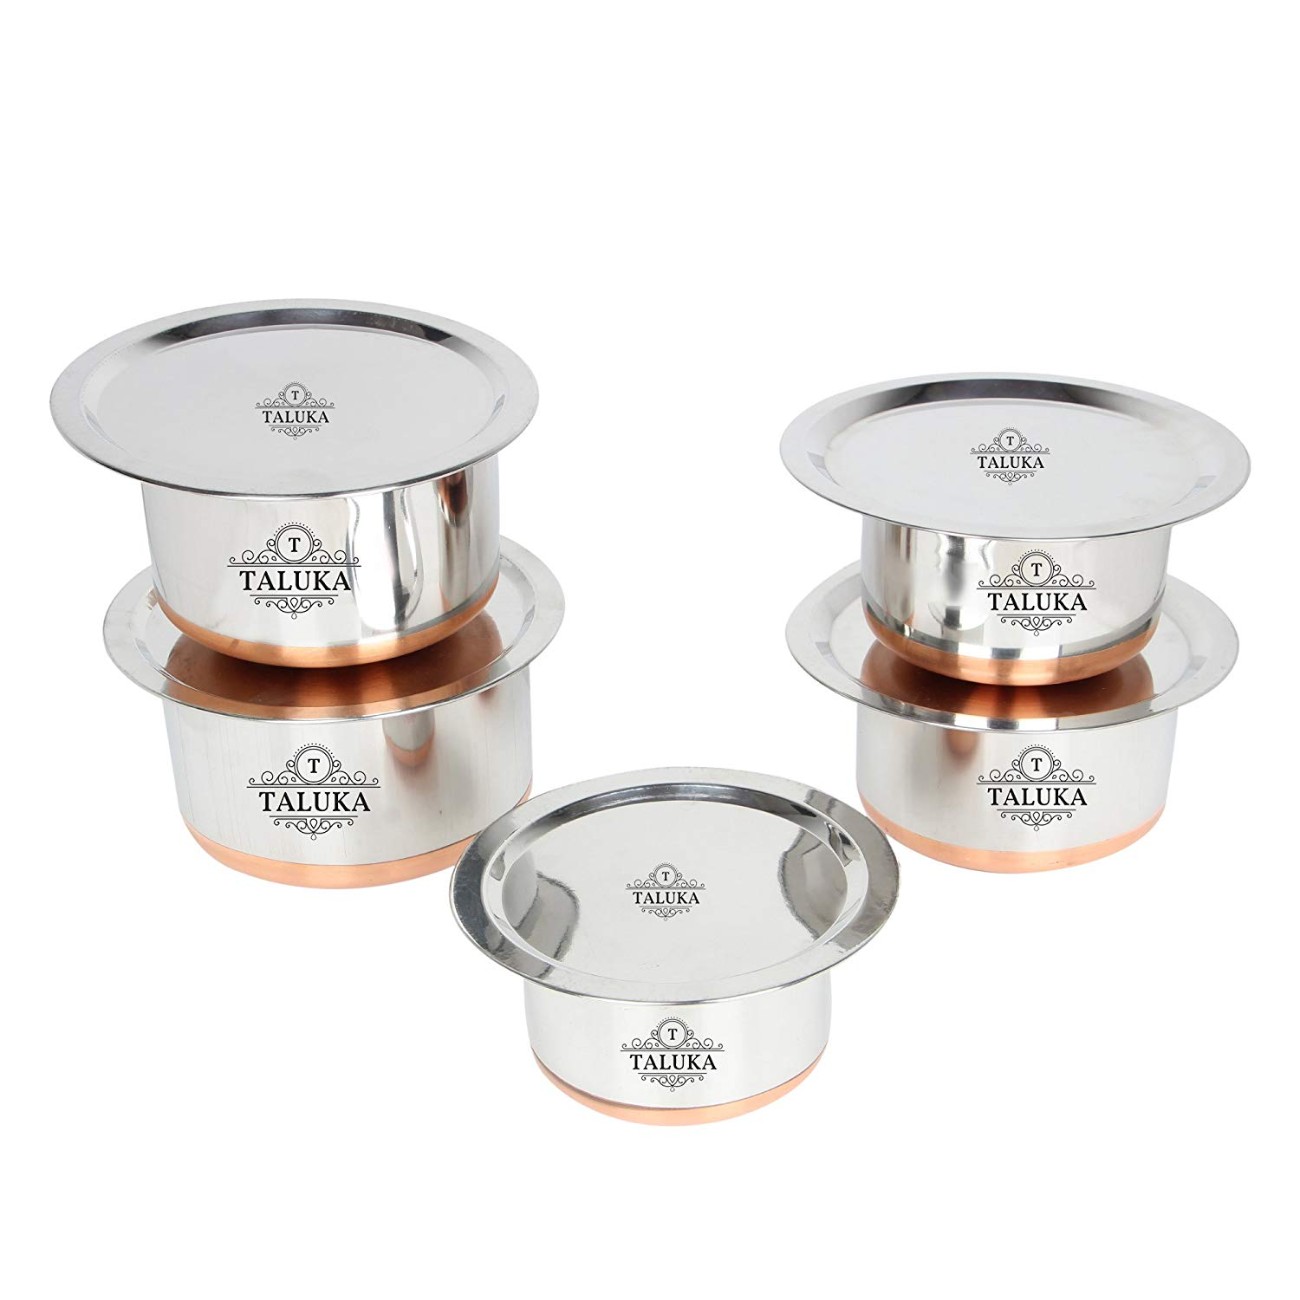 Stainless Steel Copper Bottom Tope Topia / Patila Bhaguna Cooking Set